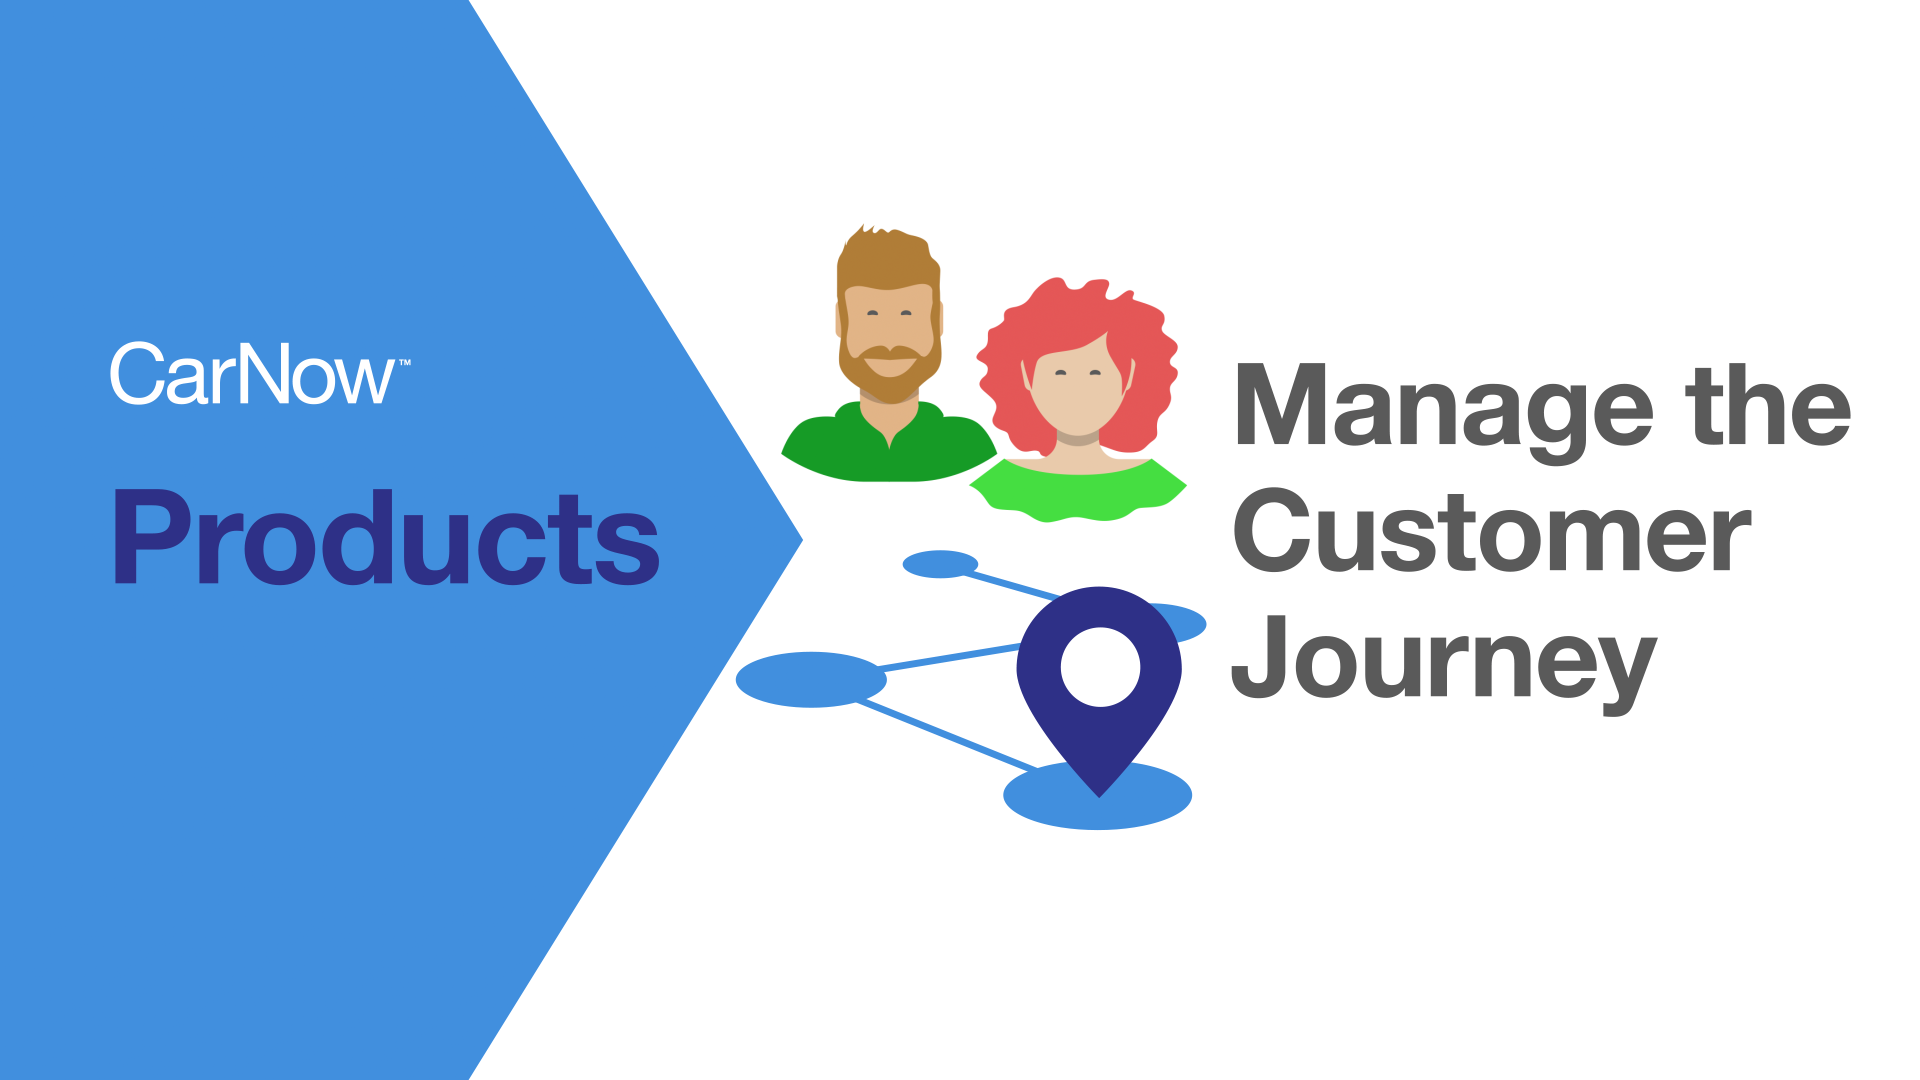 Manage the Customer Journey From Beginning to End with CarNow's Real-Time Retail™ Platform